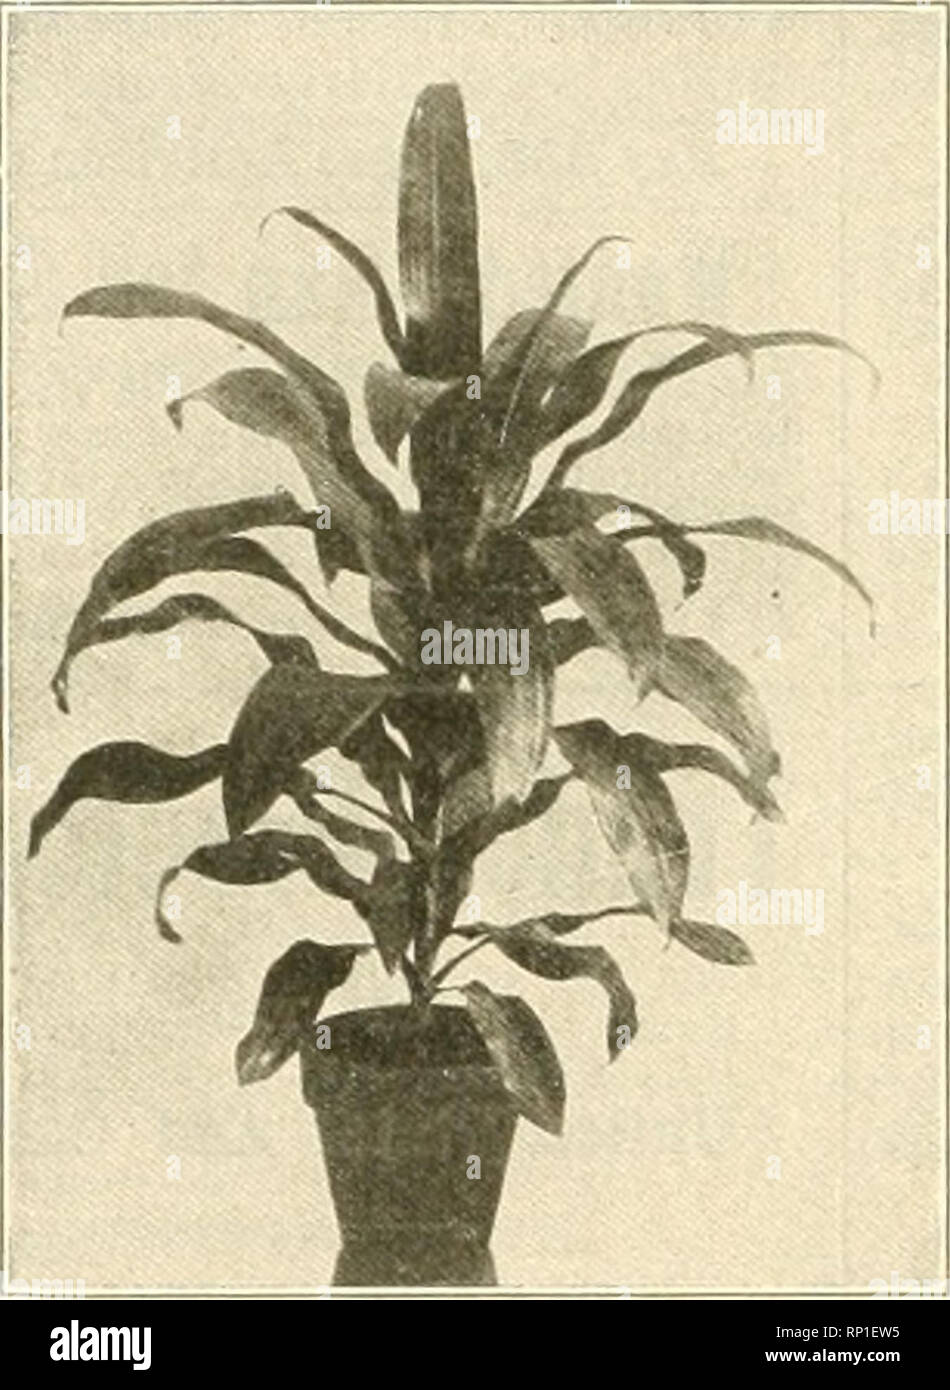 . The American florist : a weekly journal for the trade. Floriculture; Florists. SOLANUM ACULEATISSIMUM. 6-in., strong plants 50c each Primula Sinensis, 4-in $1.50 per doz. Primula Sinensis, 3-in 1.00 per doz. TRADESCANTIA VARIEGATA. (Wandering: Jew.) 2-in 40e per doz.; §3 per 100 POINSETTIAS POINSETTI.S •5 in., 3 and 4 in pot % .50 each 7 in 75 each S in 1.00 each X-M.S White, 4 ii BLOOMING HYACINTHS. .¥2.00 per doz. RHODENDRONS—X-MAS CHEER. iSl.So each. AZALEAS. .&quot;, to $1.50 each. EUONYMOUS VARIEGATA. 2%-in. (golden and silver leaf), 50c per doz. FICUS ELASTICA (Rubbers). fi-in 50c ea Stock Photo